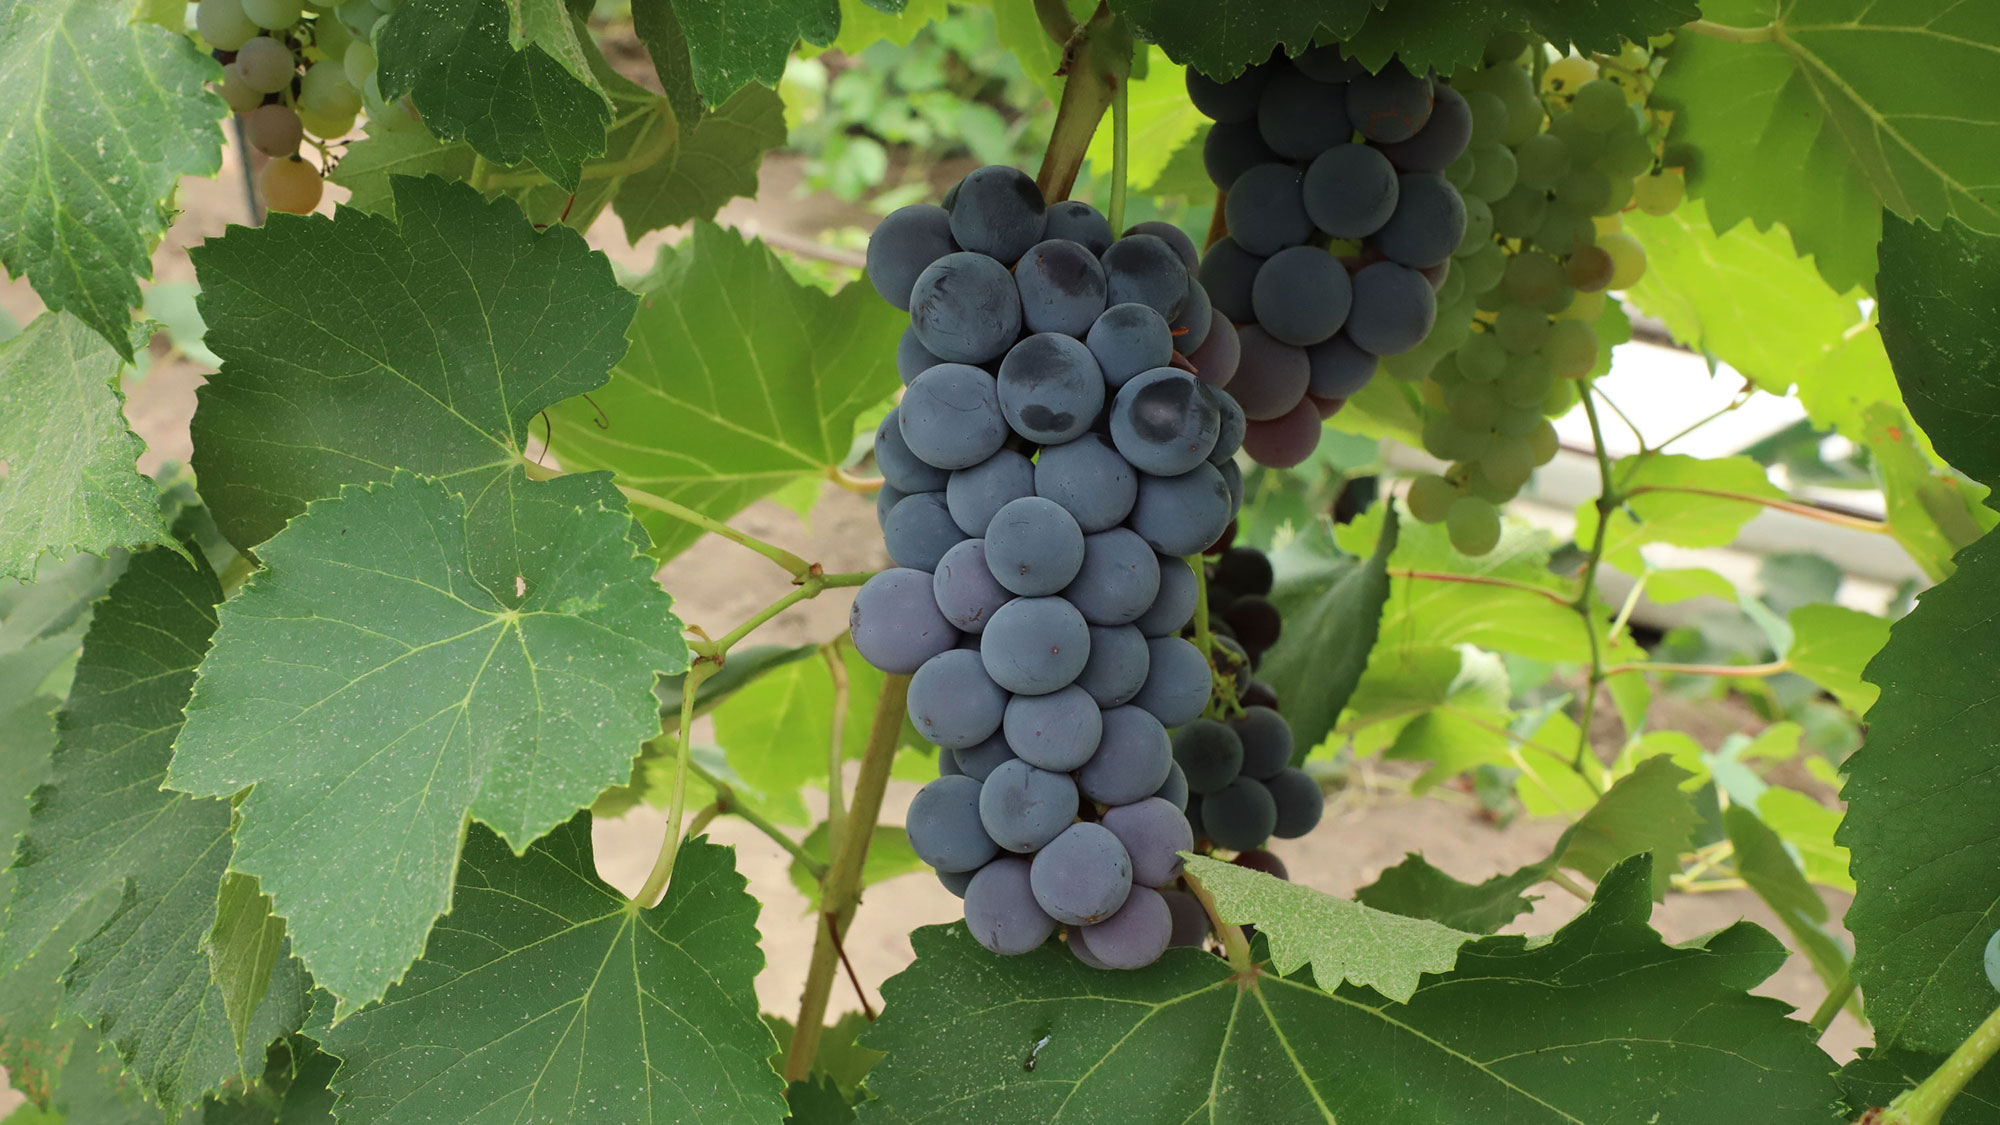 Some Nebraska winemakers are optimistic about the state’s 2020 vintage even though grape harvest final tonnage estimates are roughly half of last year’s crop. 